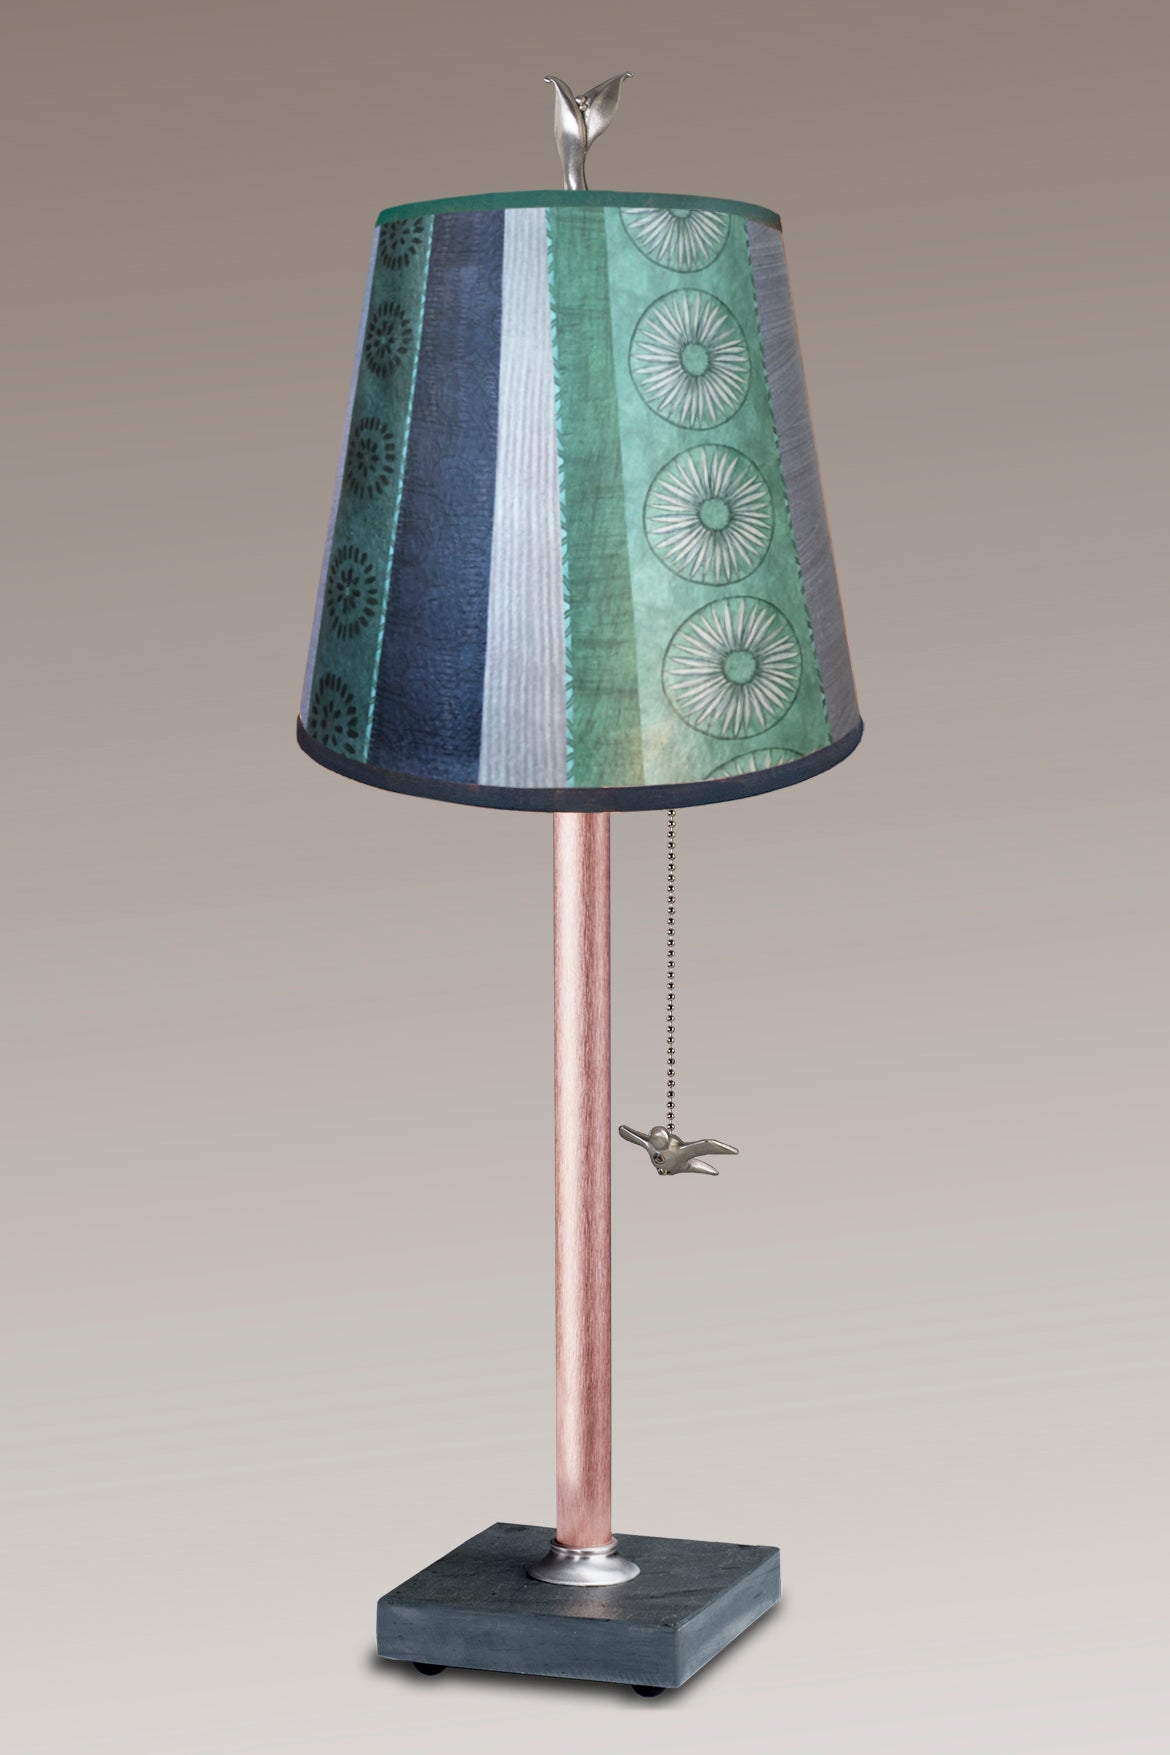 Janna Ugone &amp; Co Table Lamps Copper Table Lamp with Small Drum Shade in Serape Waters